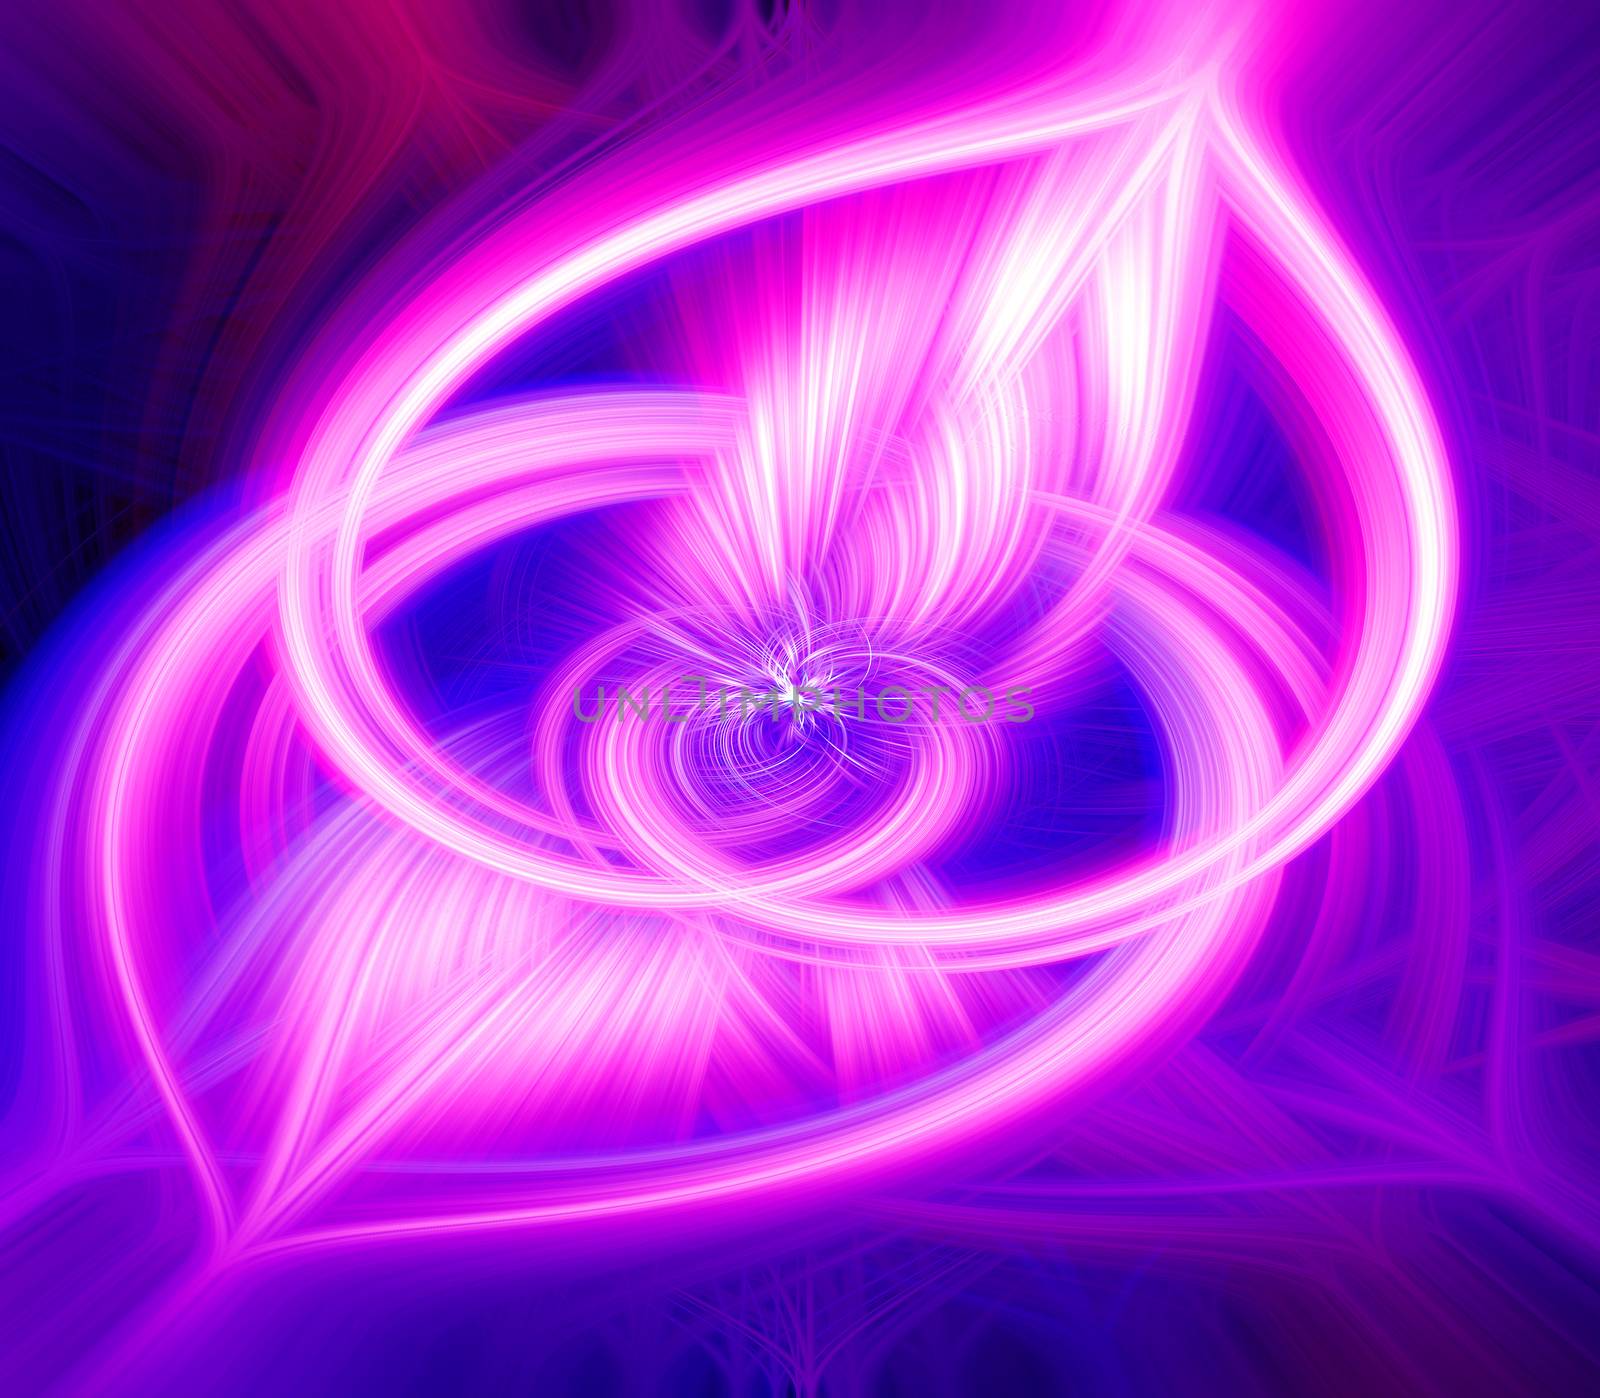 Beautiful abstract intertwined glowing 3d fibers forming a shape of sparkle, flame, flower, interlinked hearts. Blue, maroon, pink, and purple colors. Illustration by DamantisZ